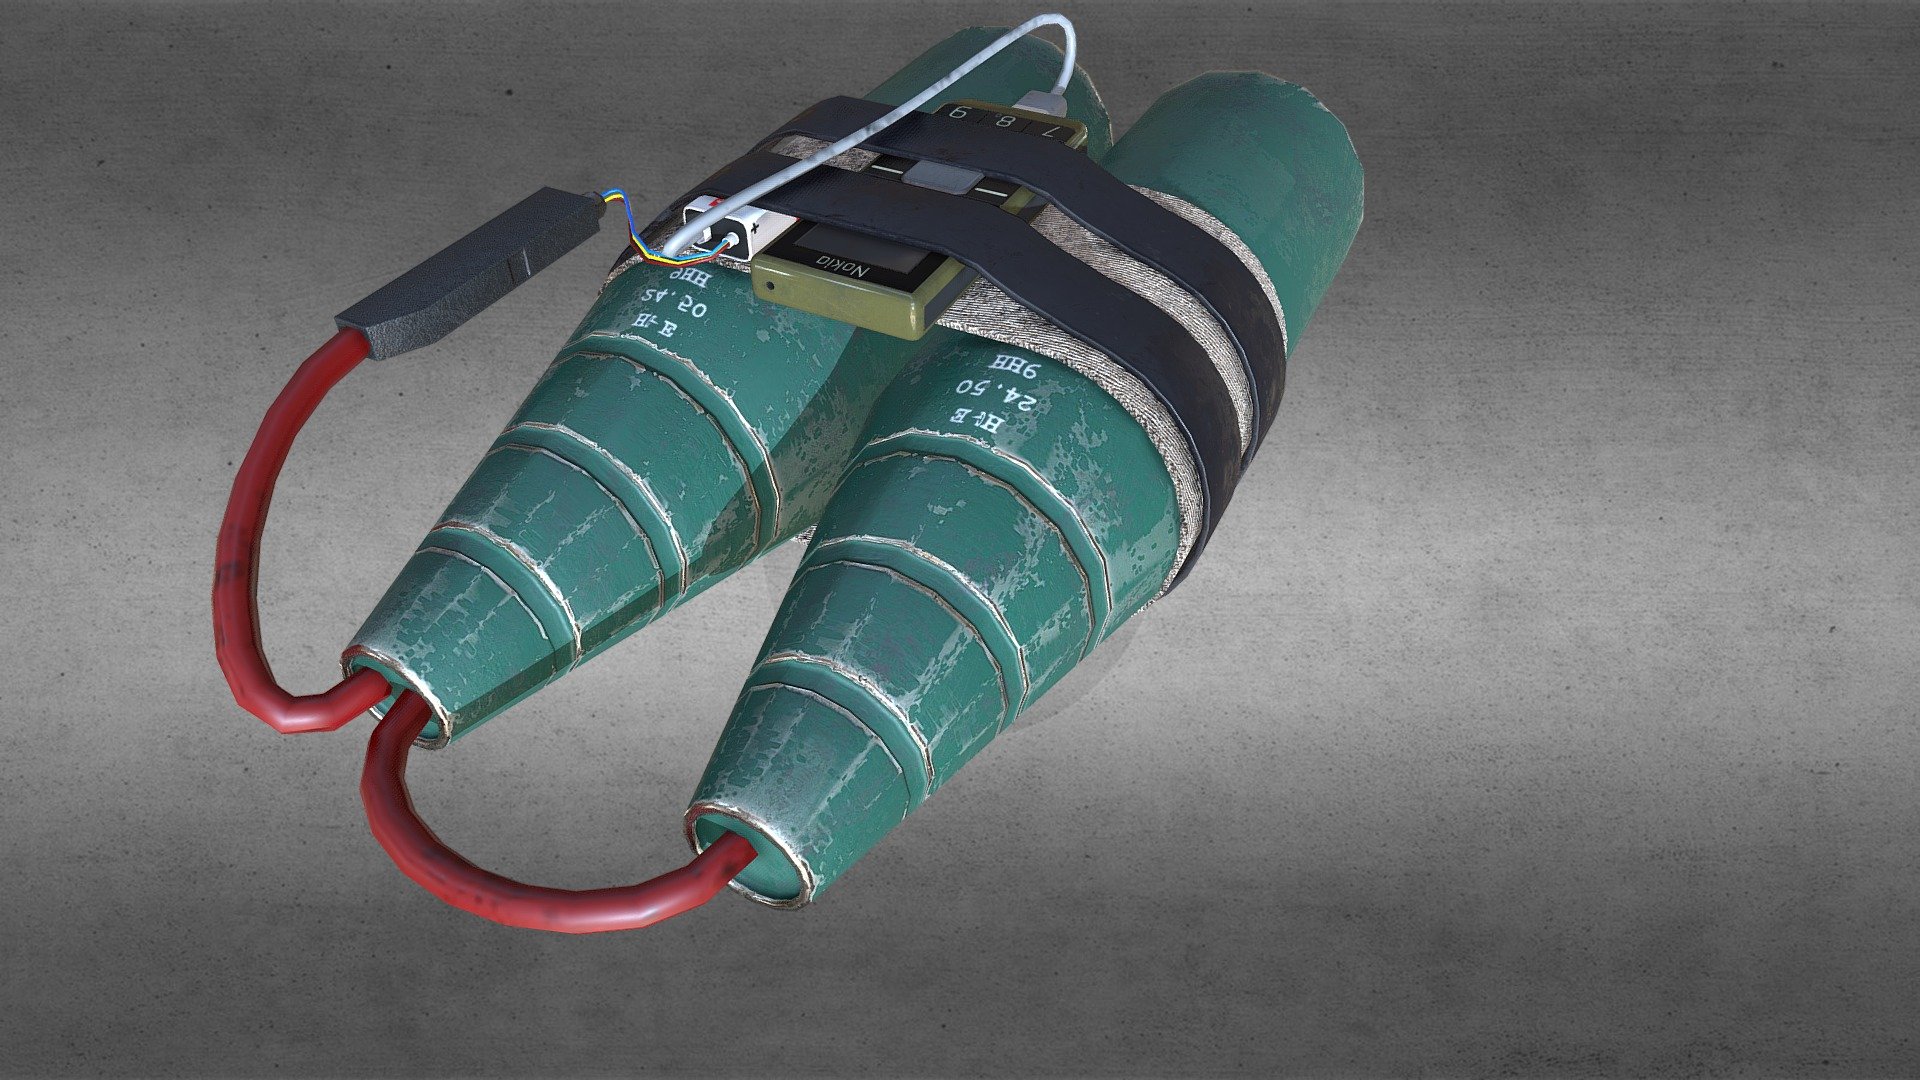 homemade bomb. C4  bomb. free game asset. gameready model. military bobm. baked on marmoset. textured in substance painter 3d model